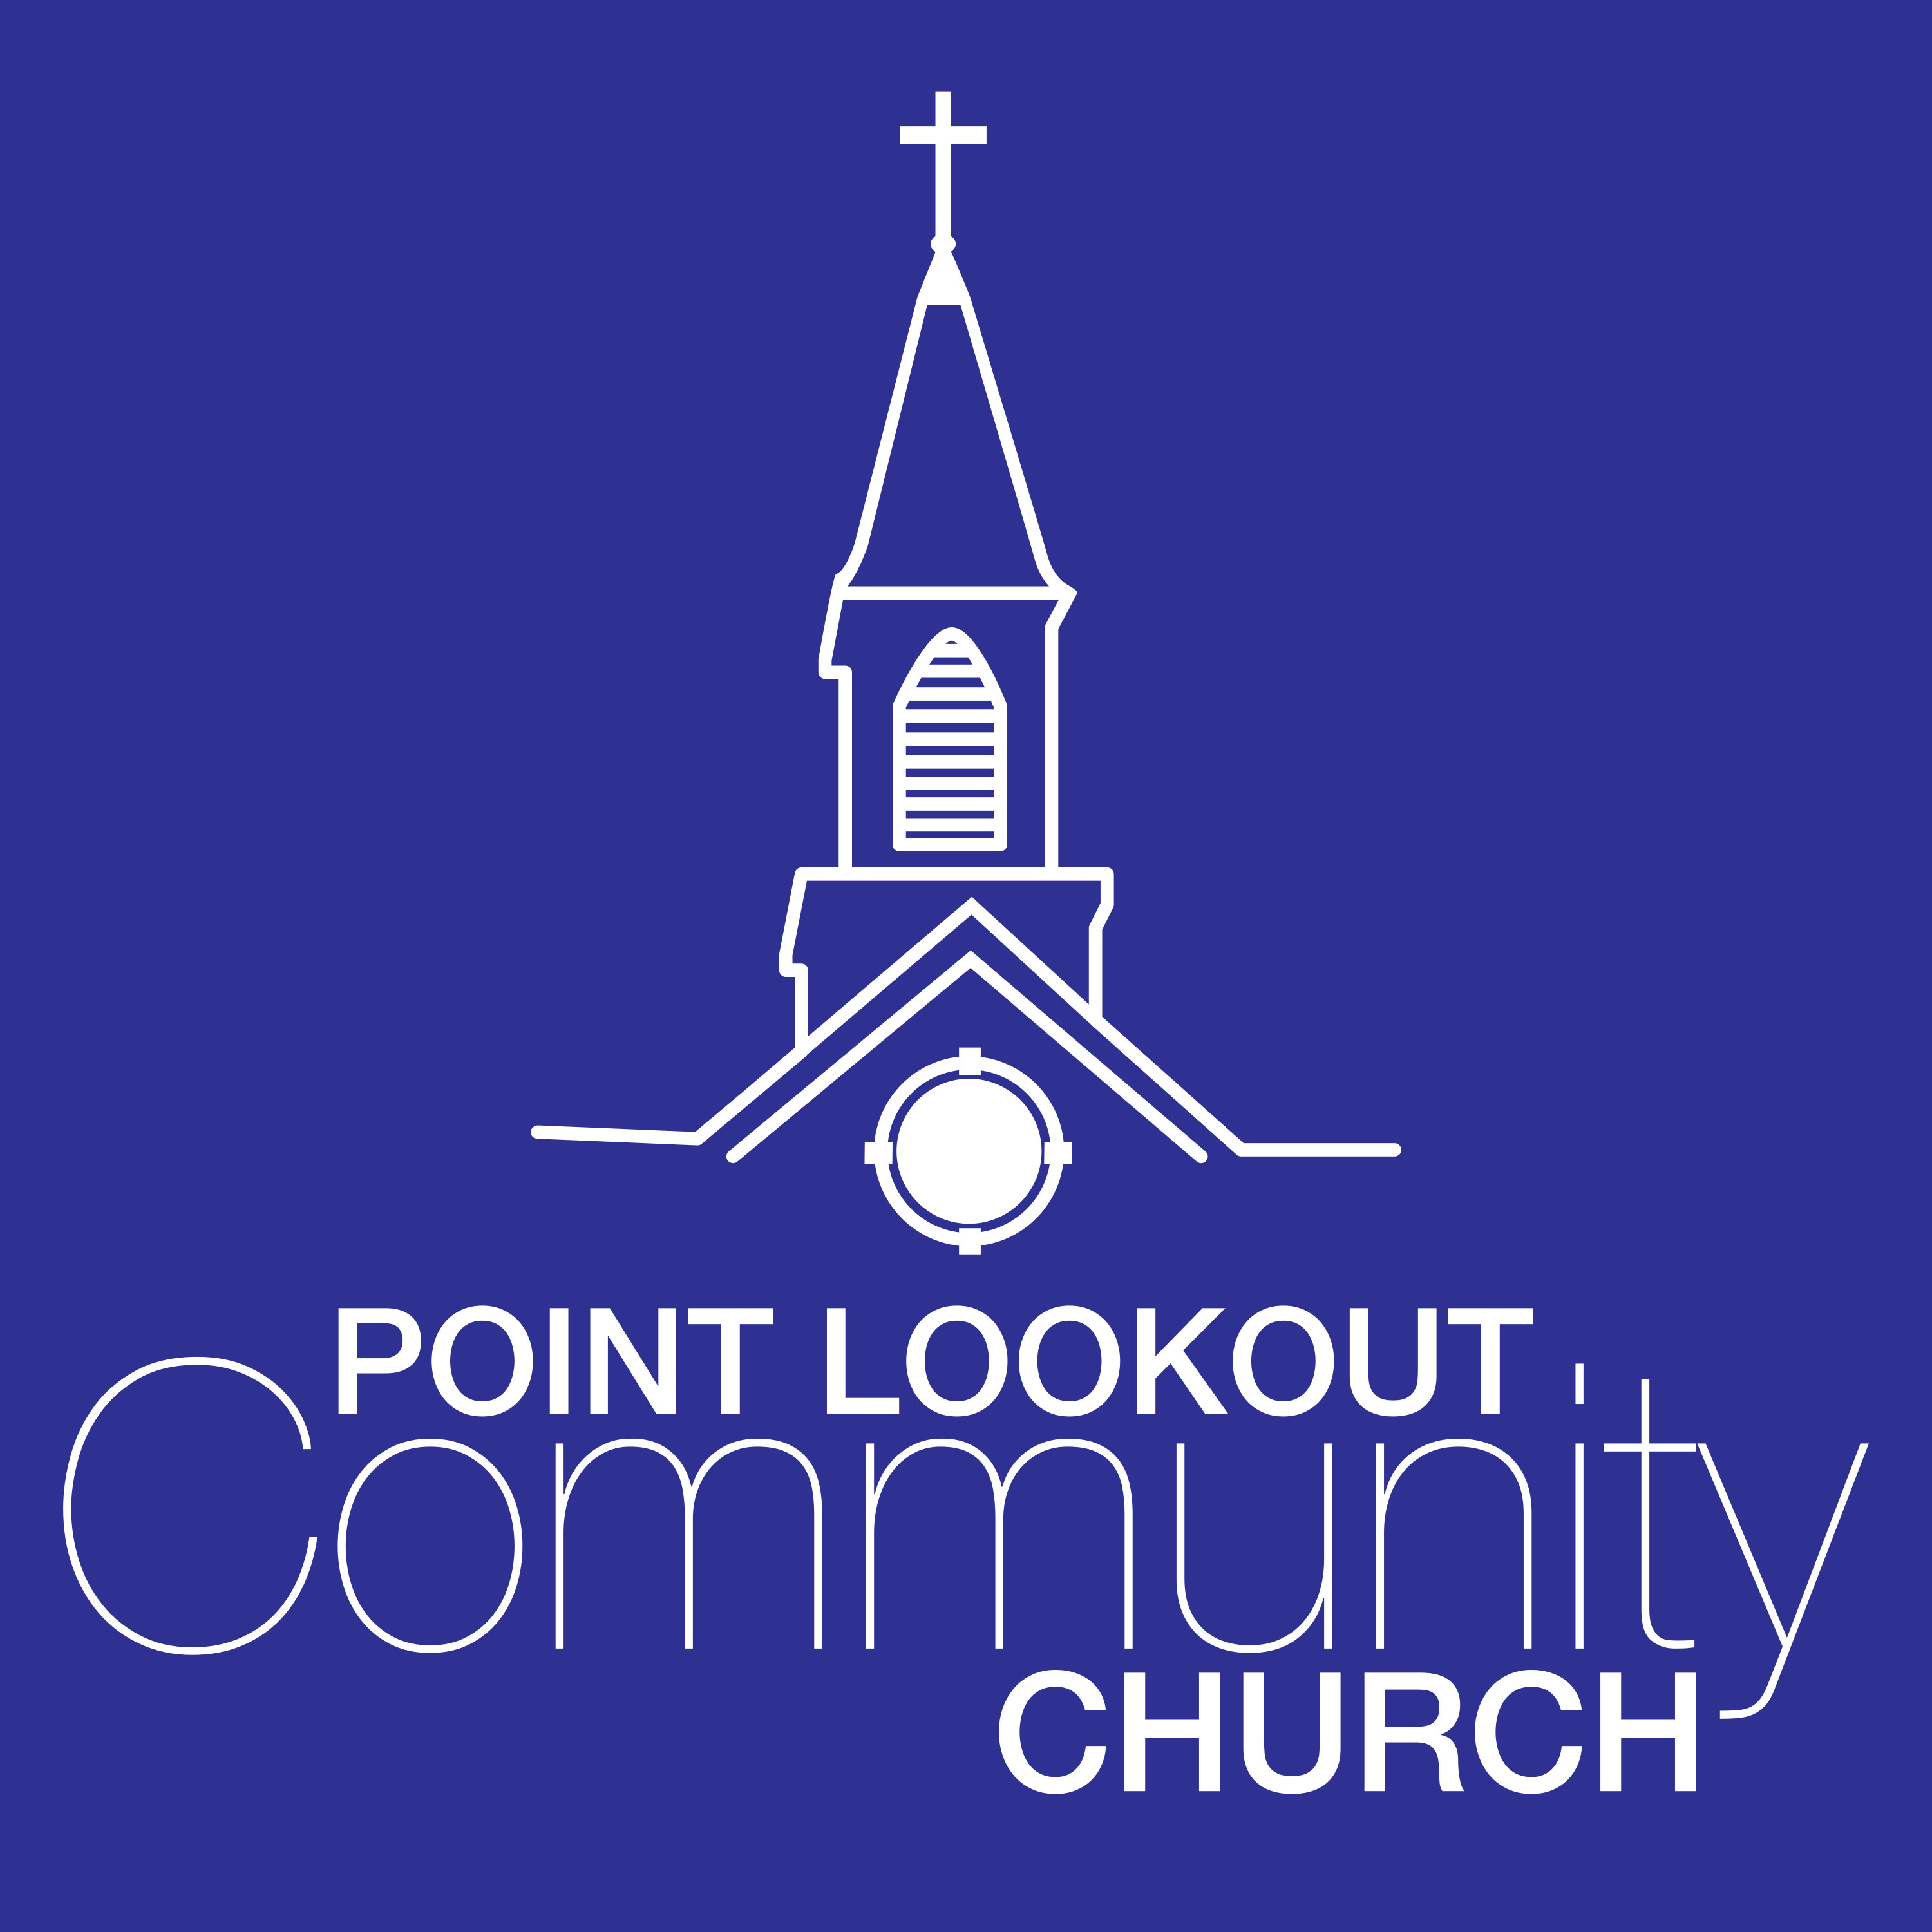 The Point Lookout Community Church